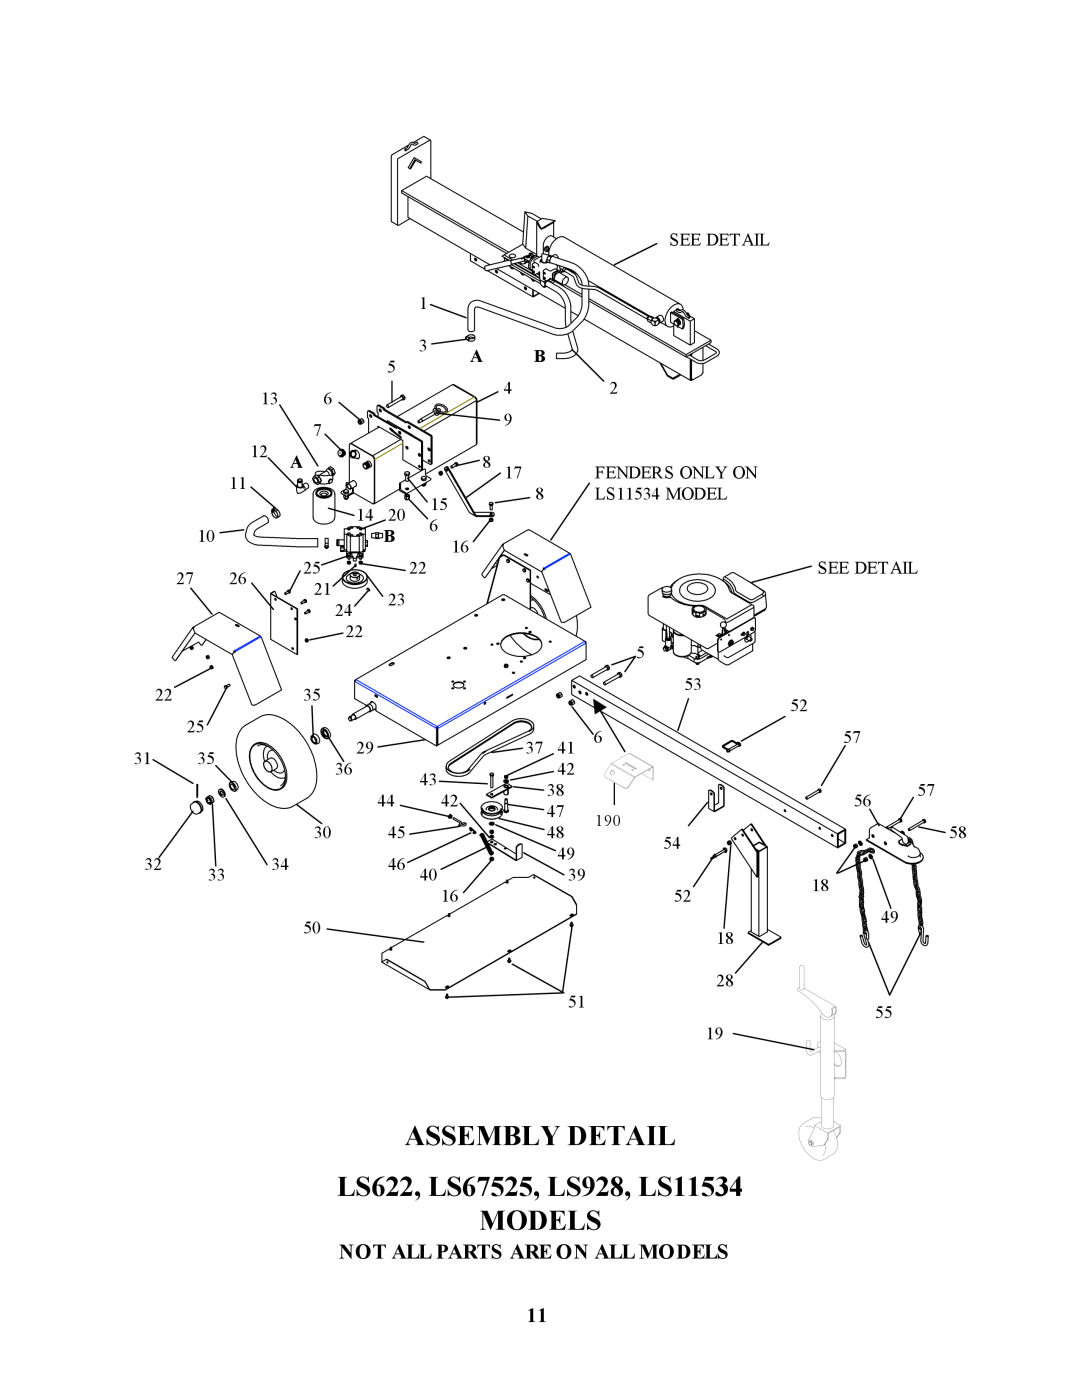 Swisher LS12534D owner manual ASSEMBLY DETAIL LS622, LS67525, LS928, LS11534, Not All Parts Are On All Models 